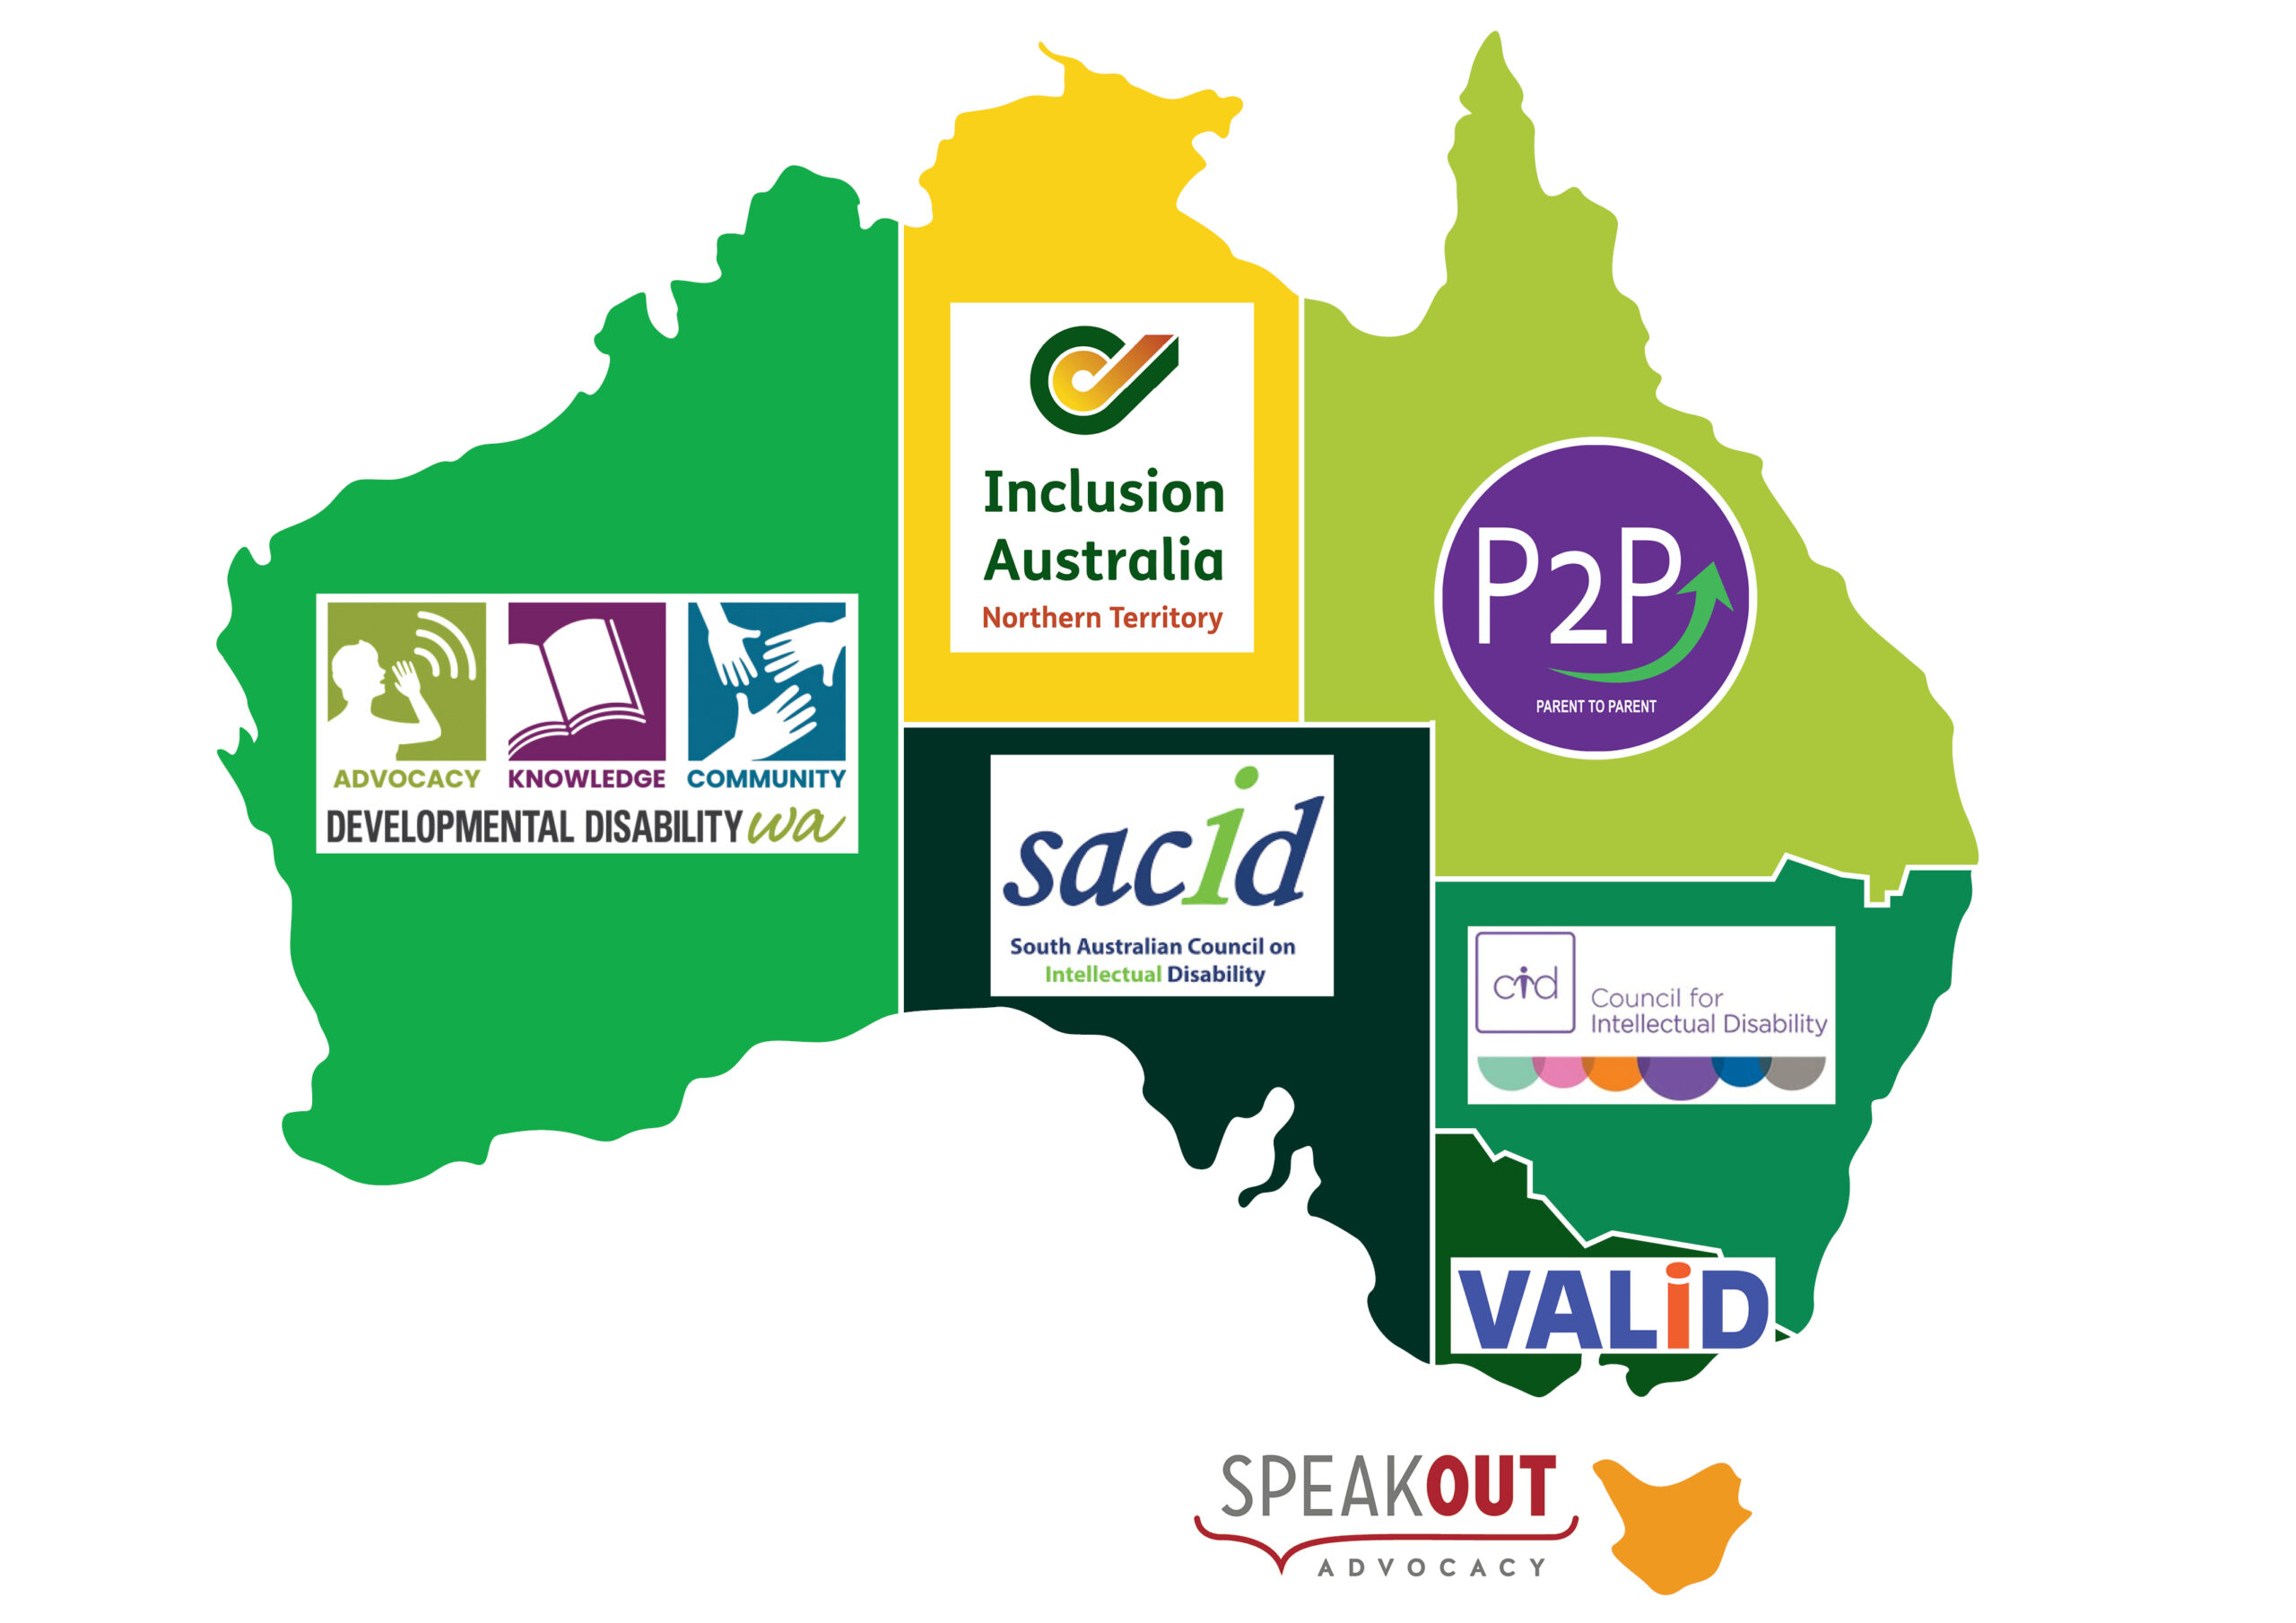 Map of Australia with Inclusion Australia member organisations